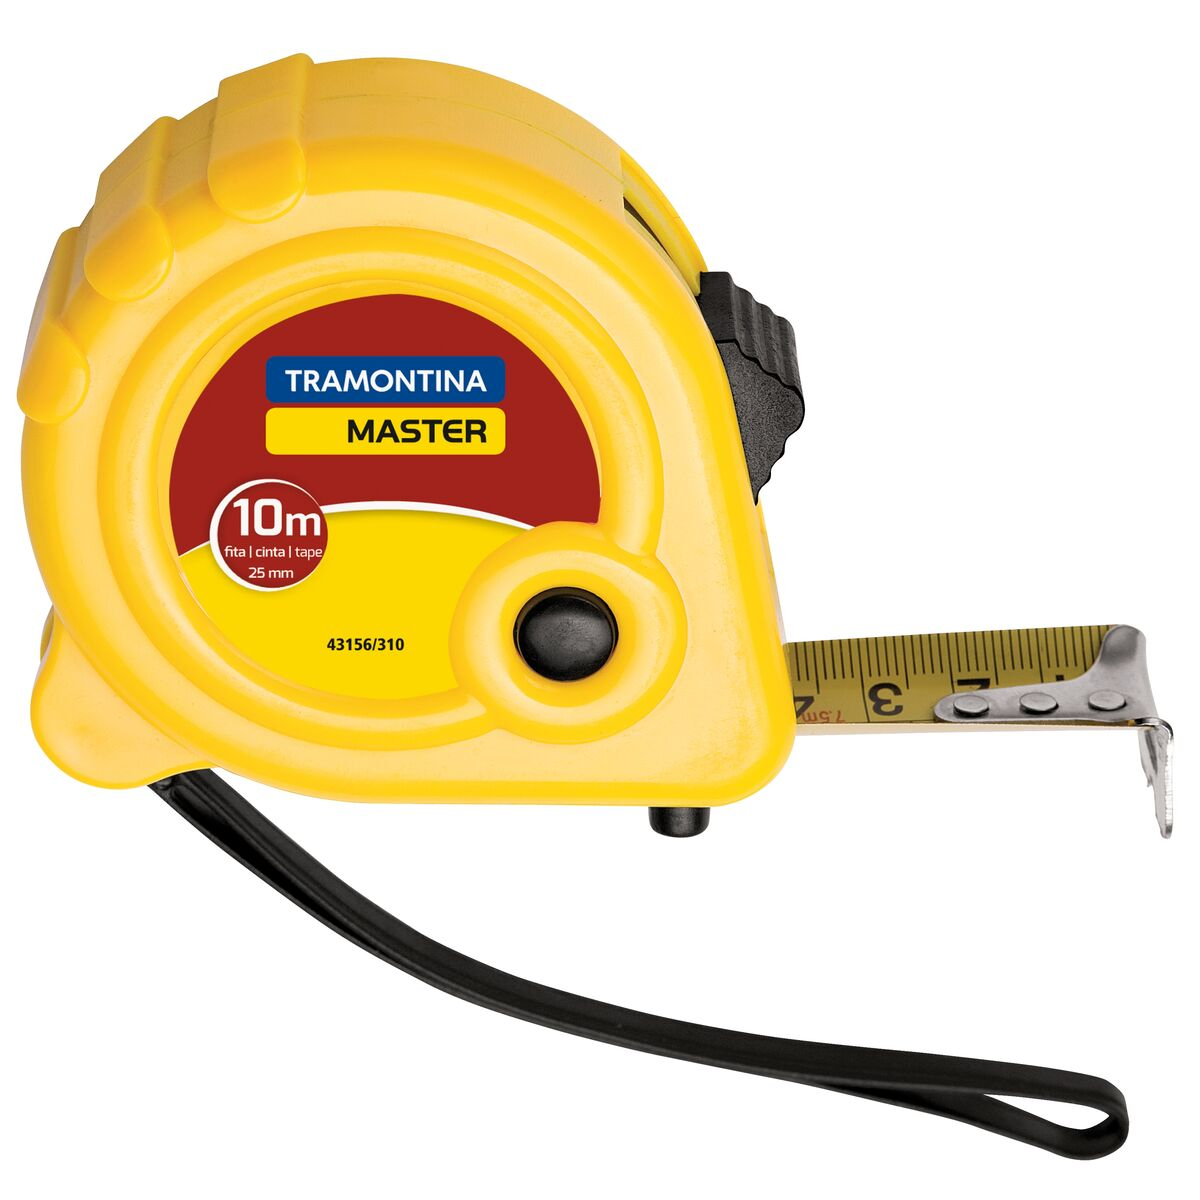 10 m Measuring tape with lock system